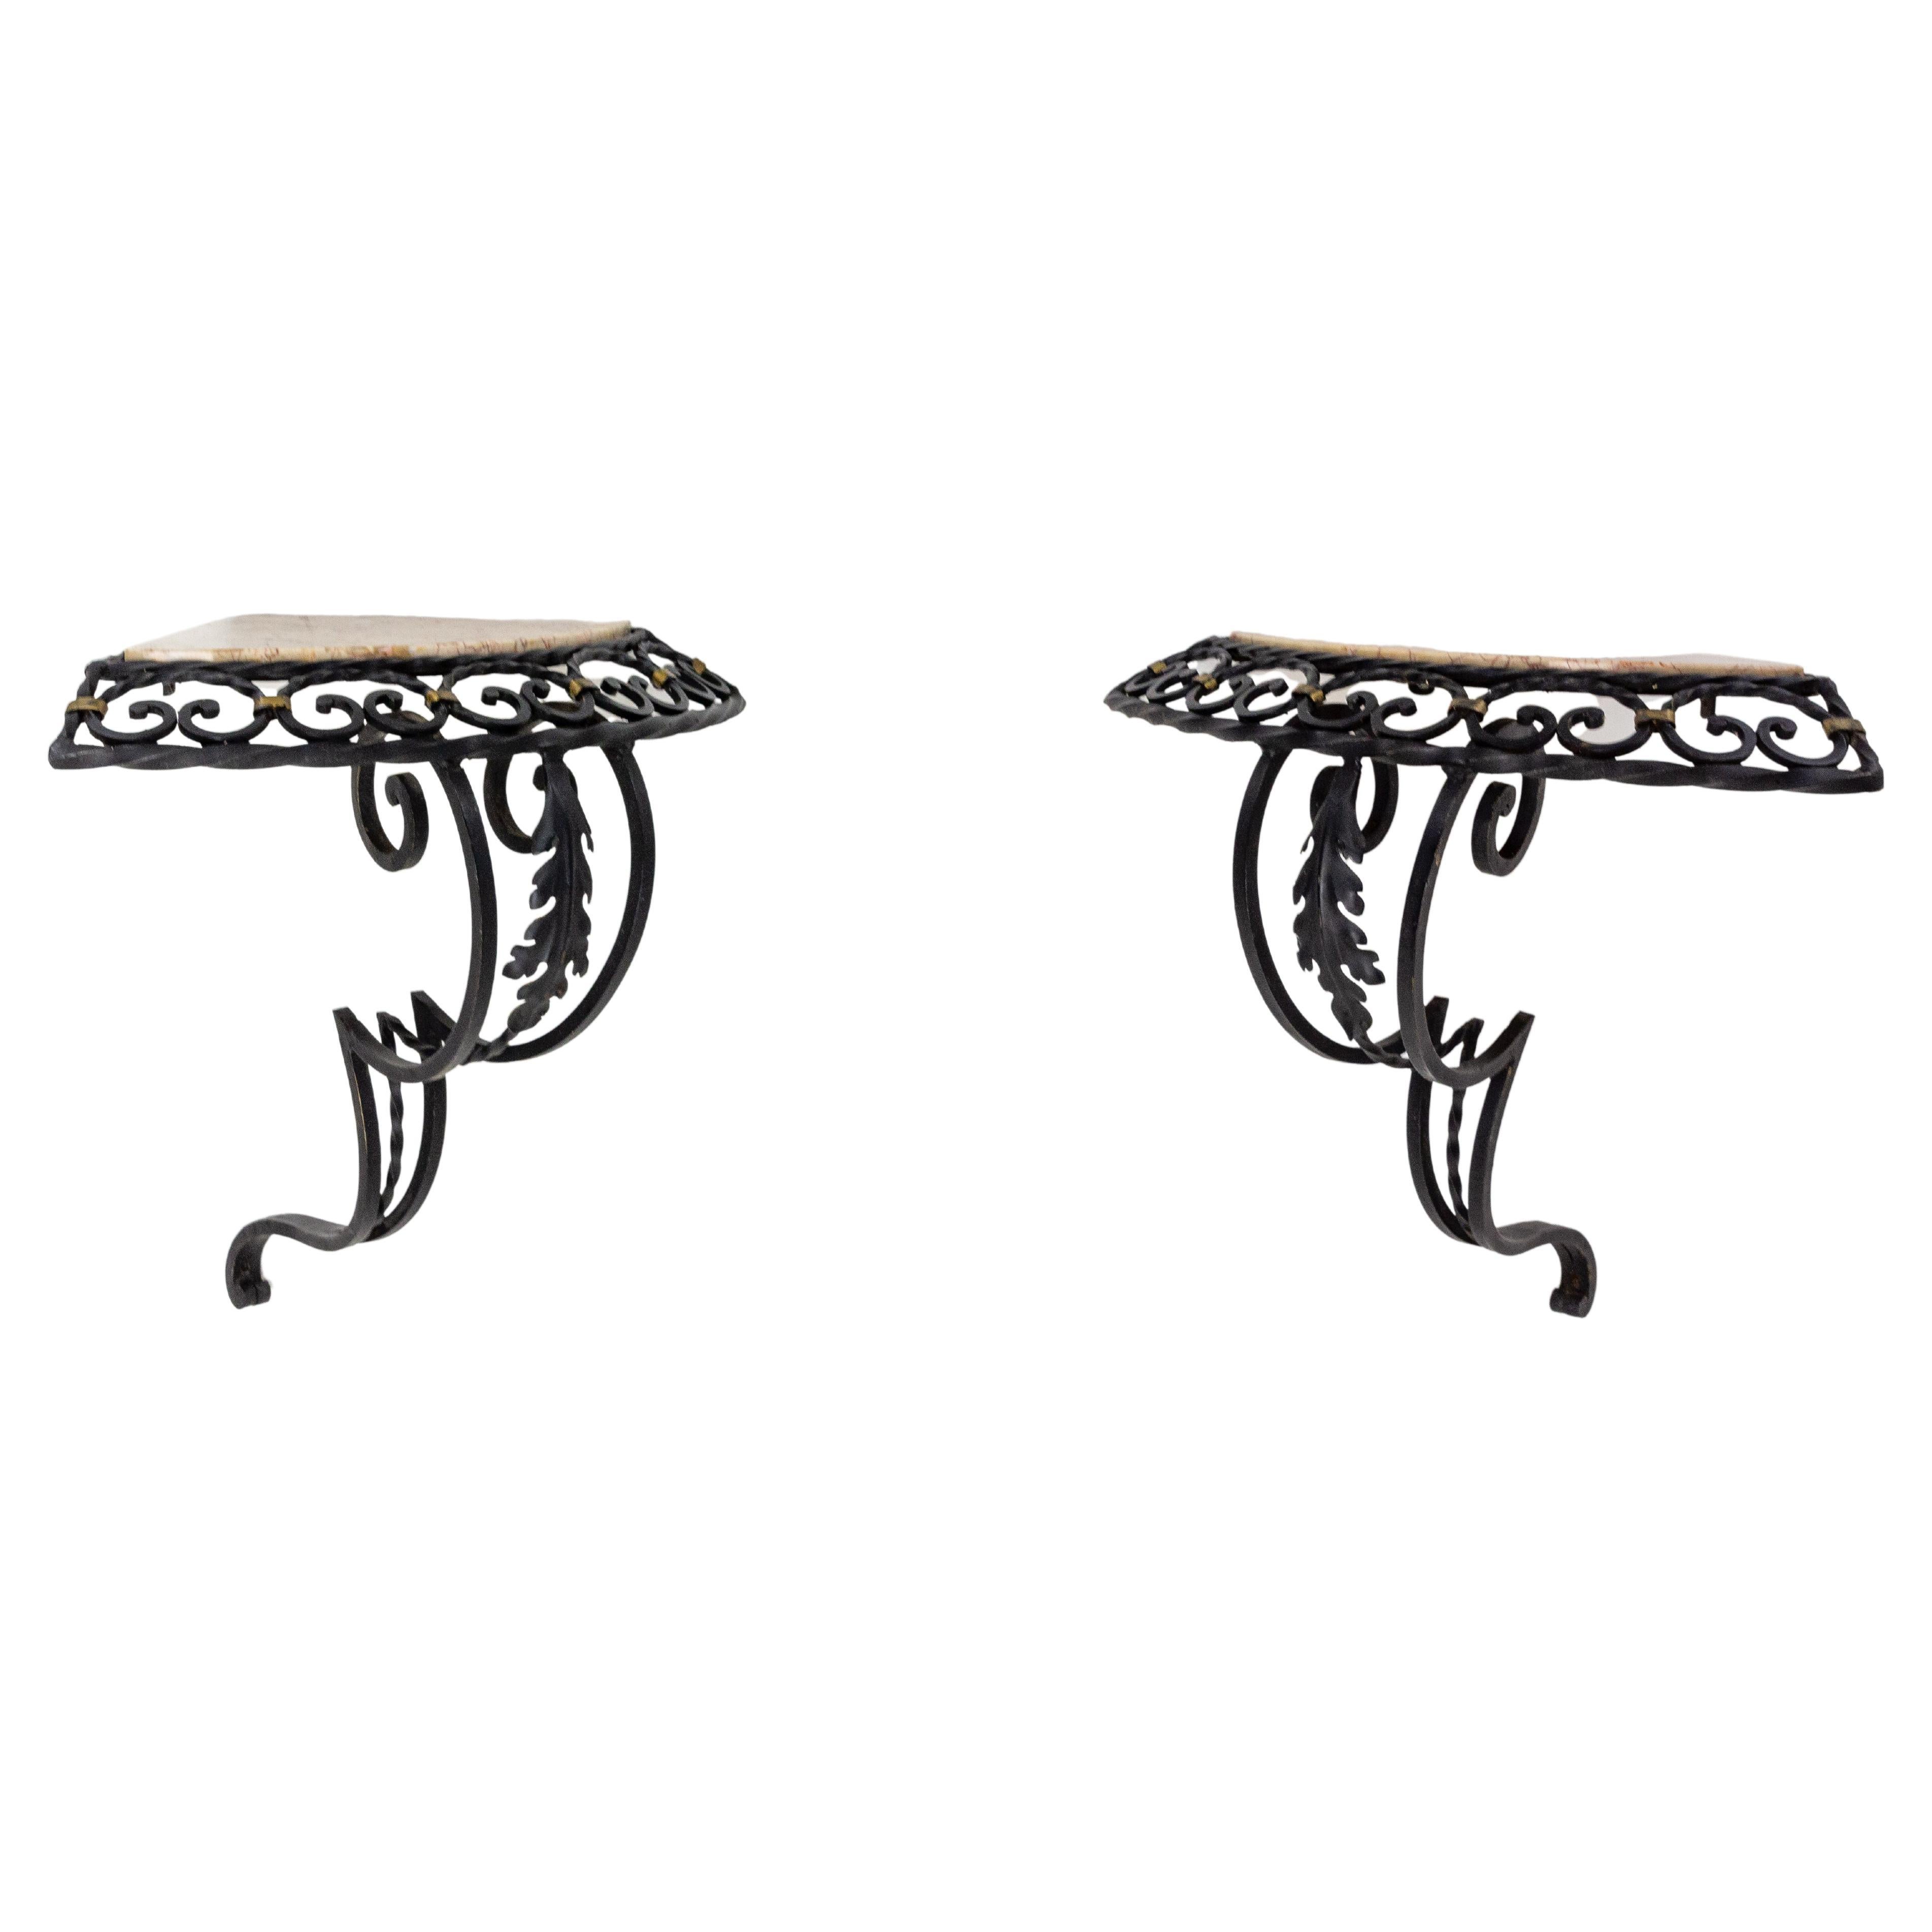 Pair of Art Deco Small Corner Console Tables French Brackets Wall Mounted